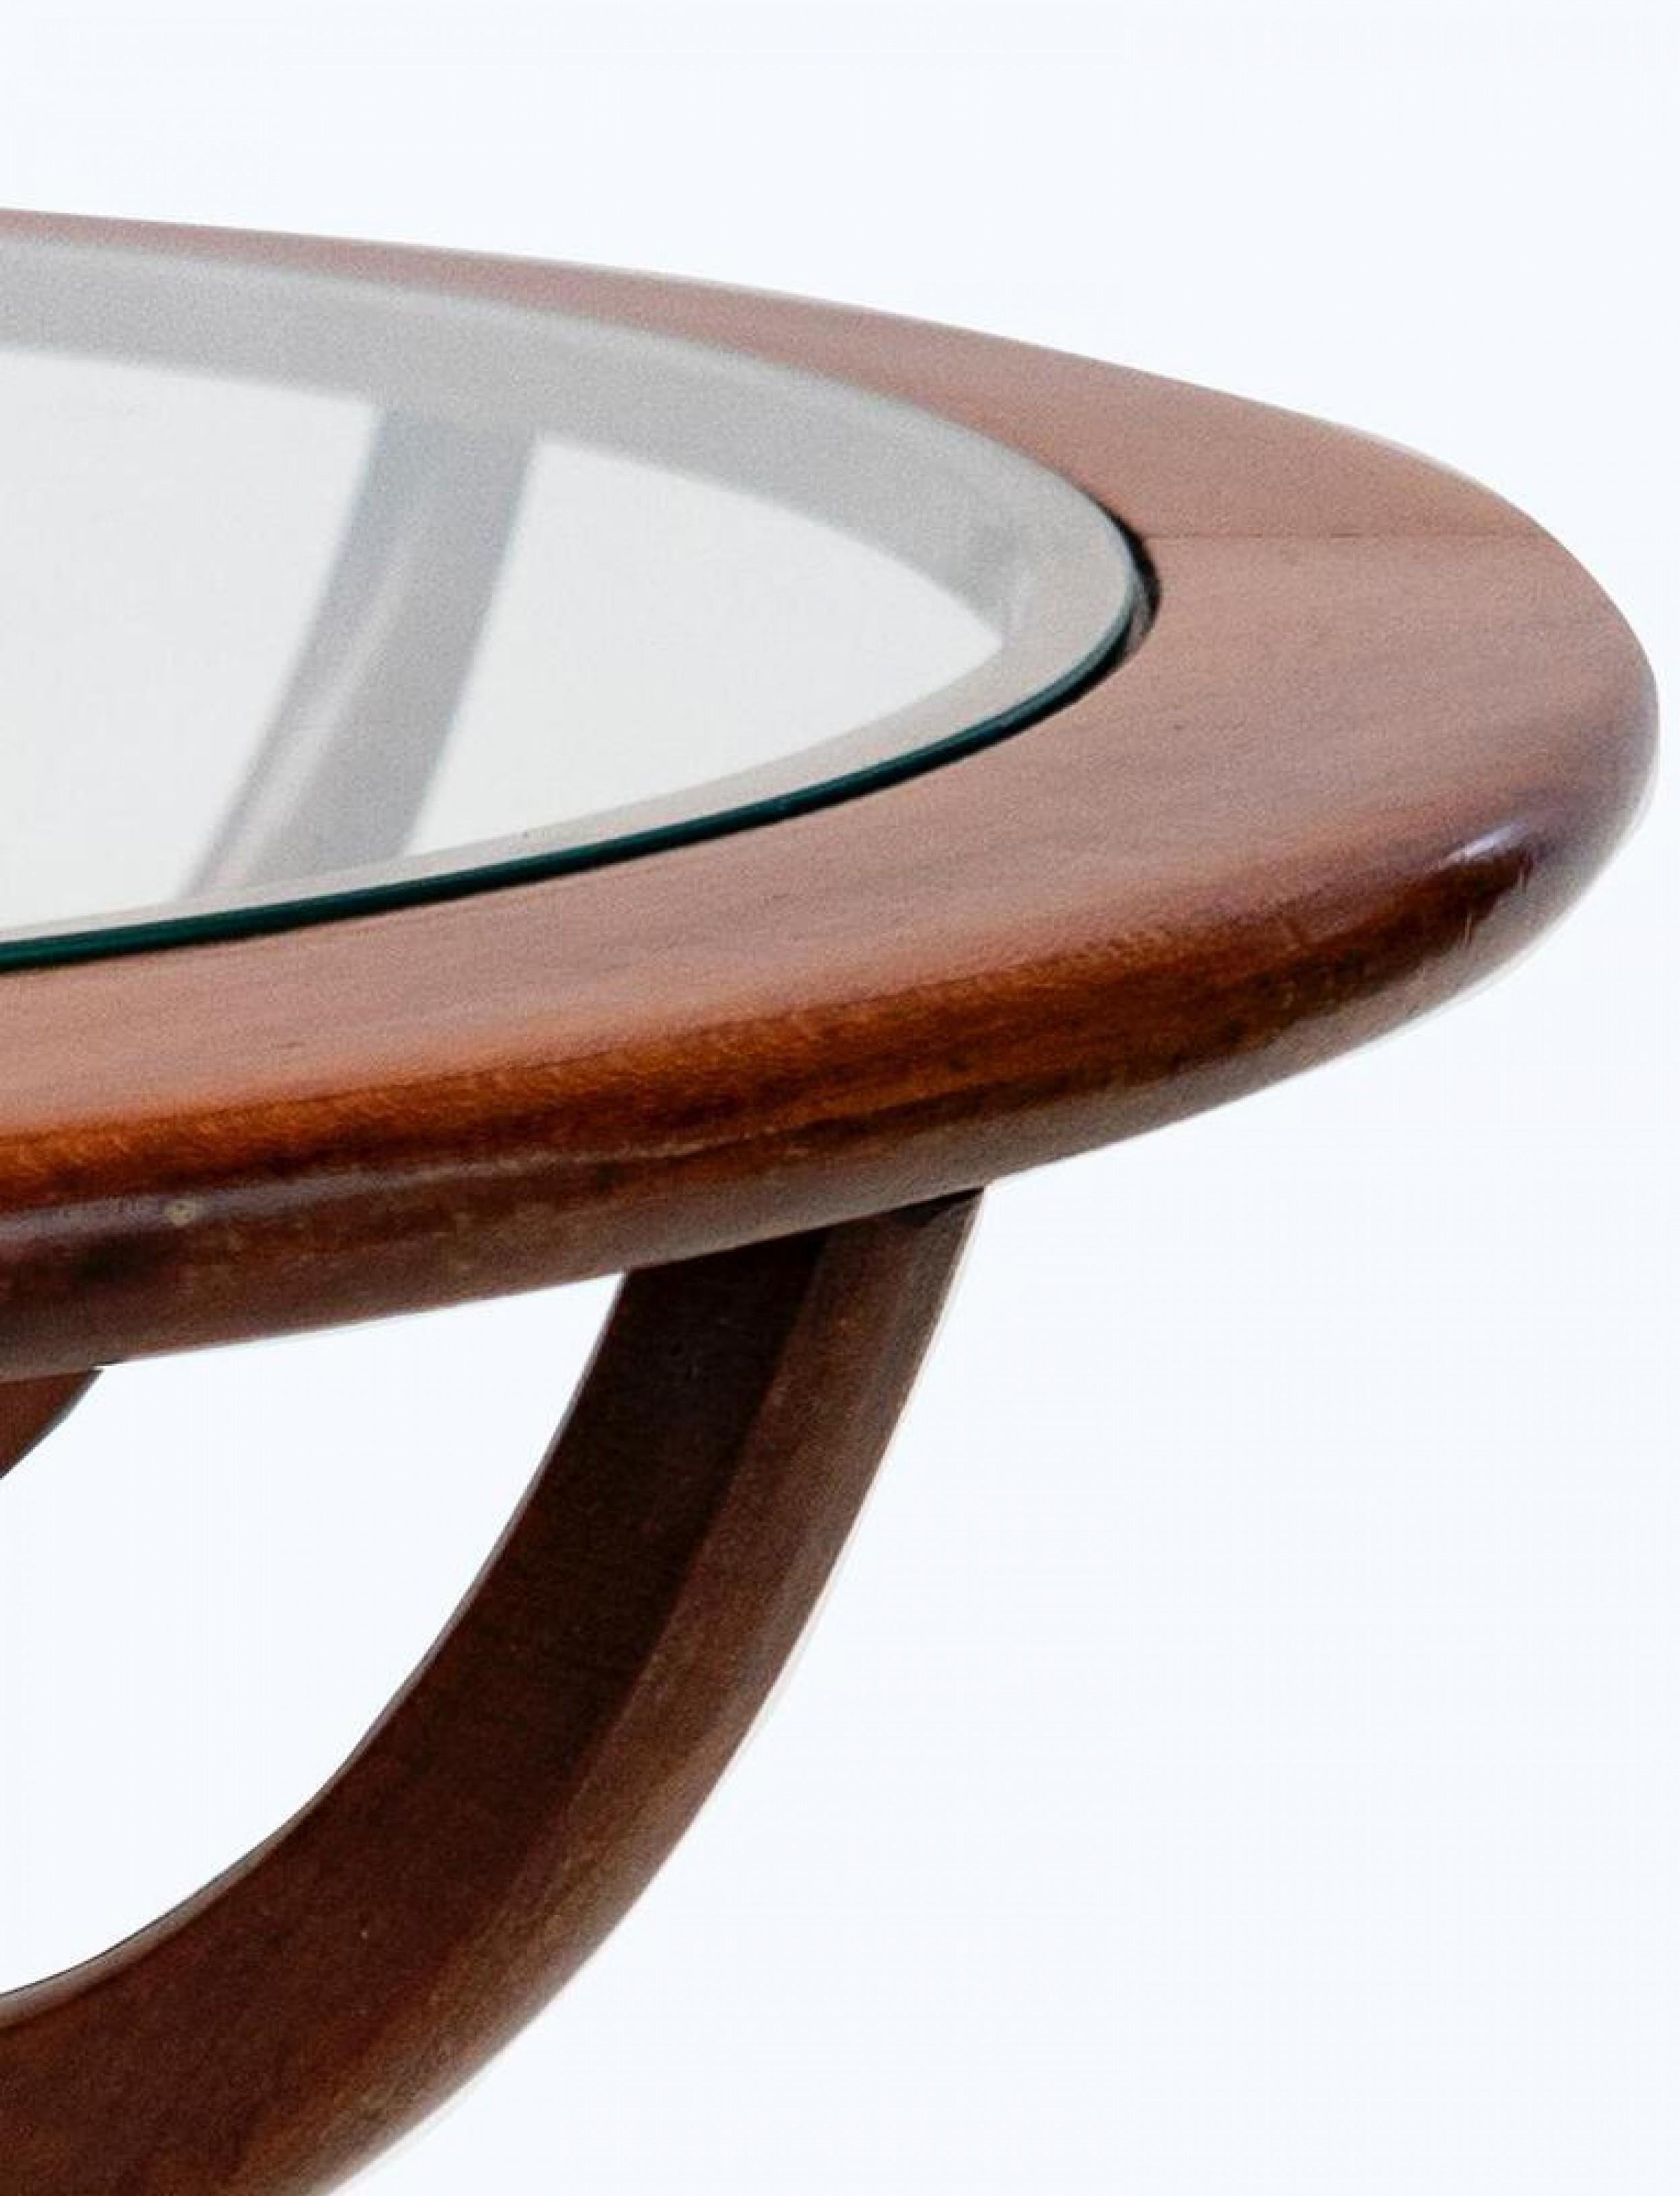 Midcentury American Modern Round Wood & Glass Coffee Table For Sale 1